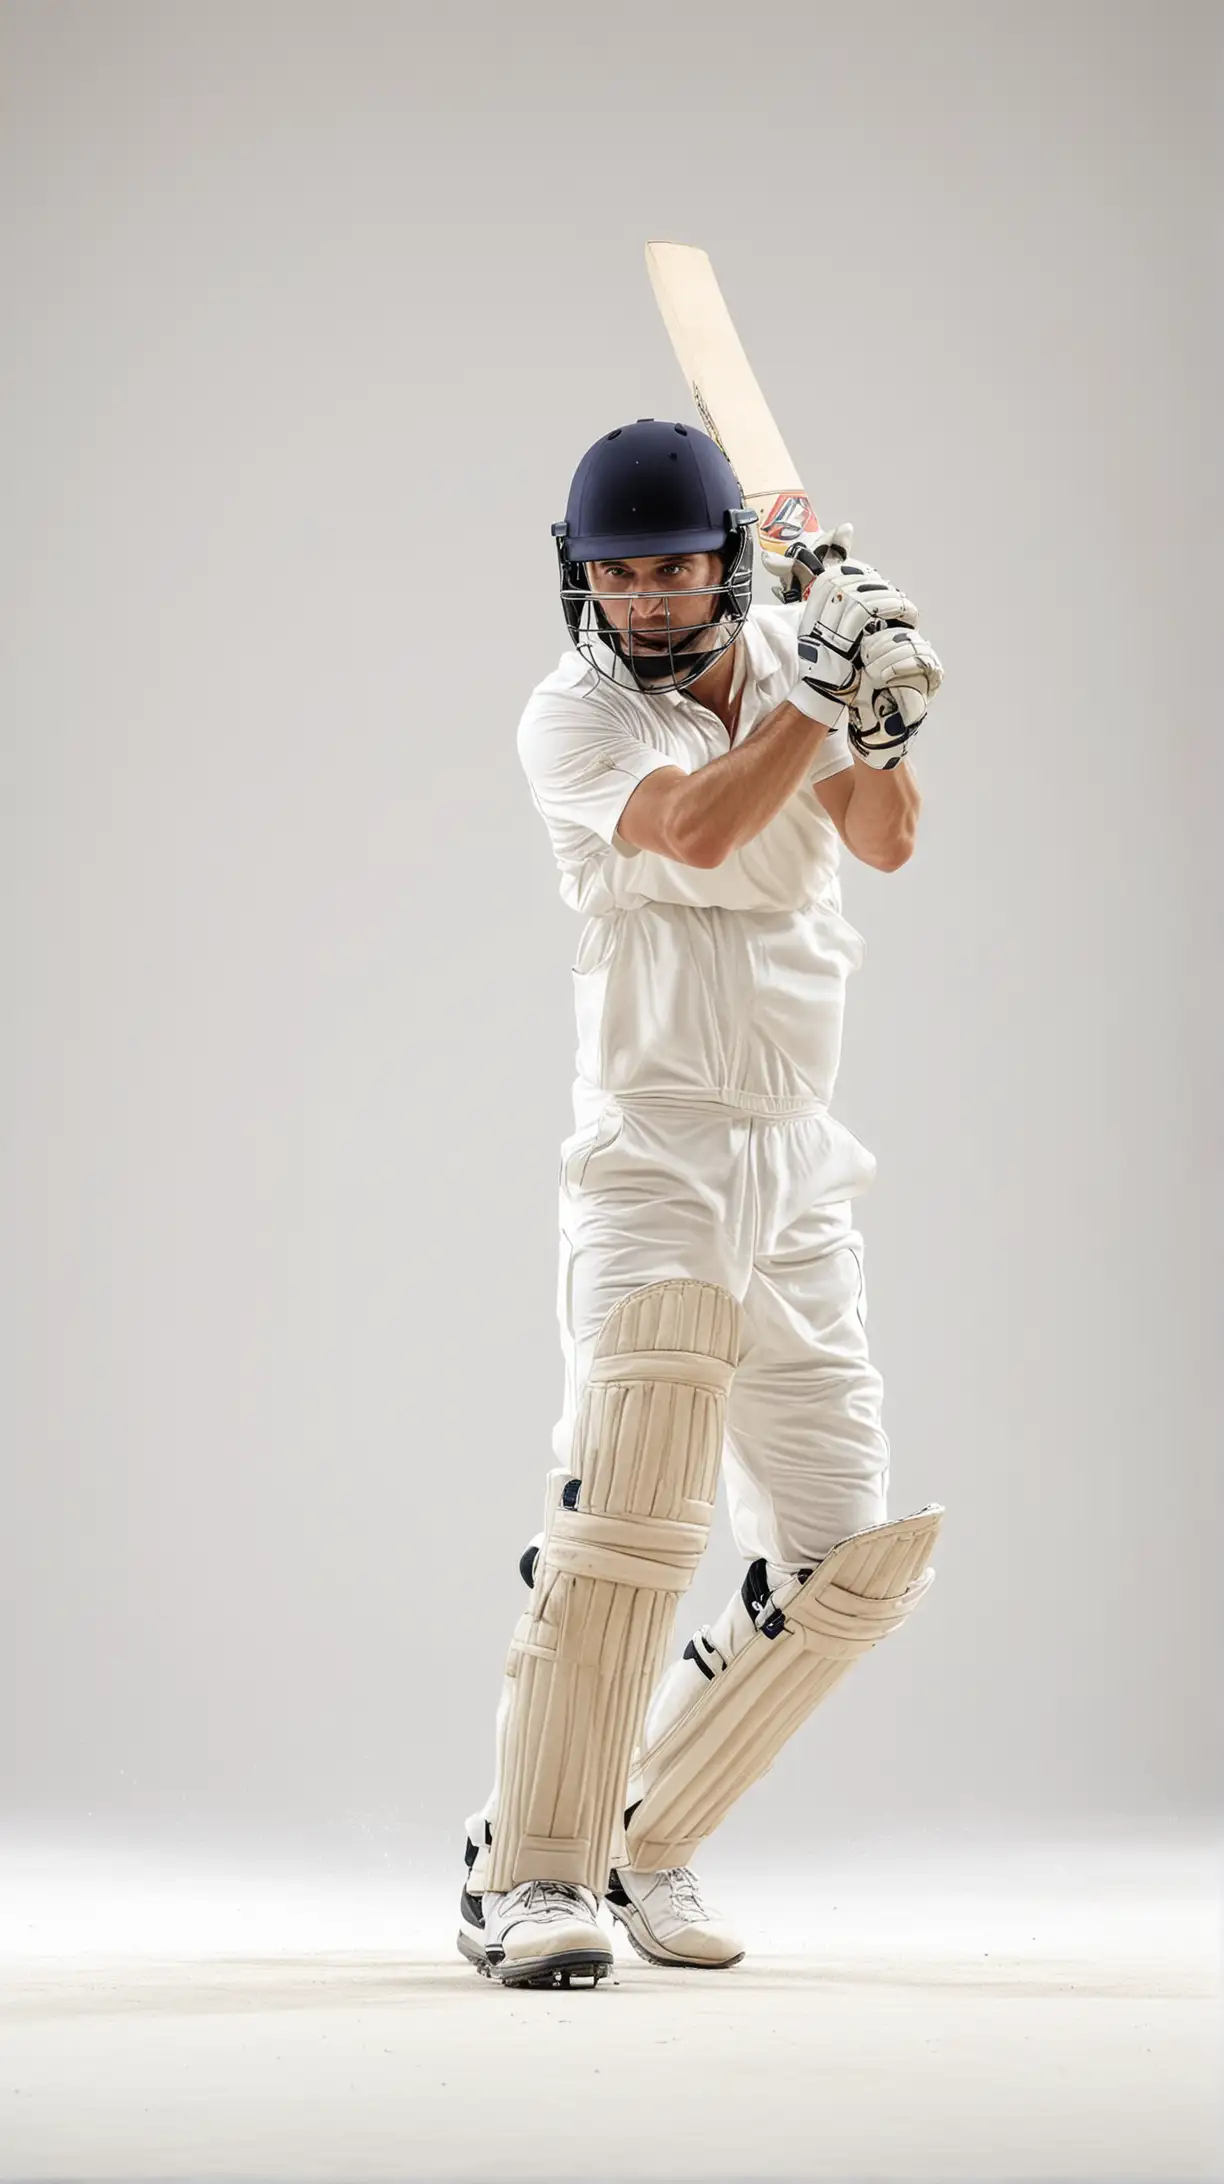 Cricket Player in Action on White Background